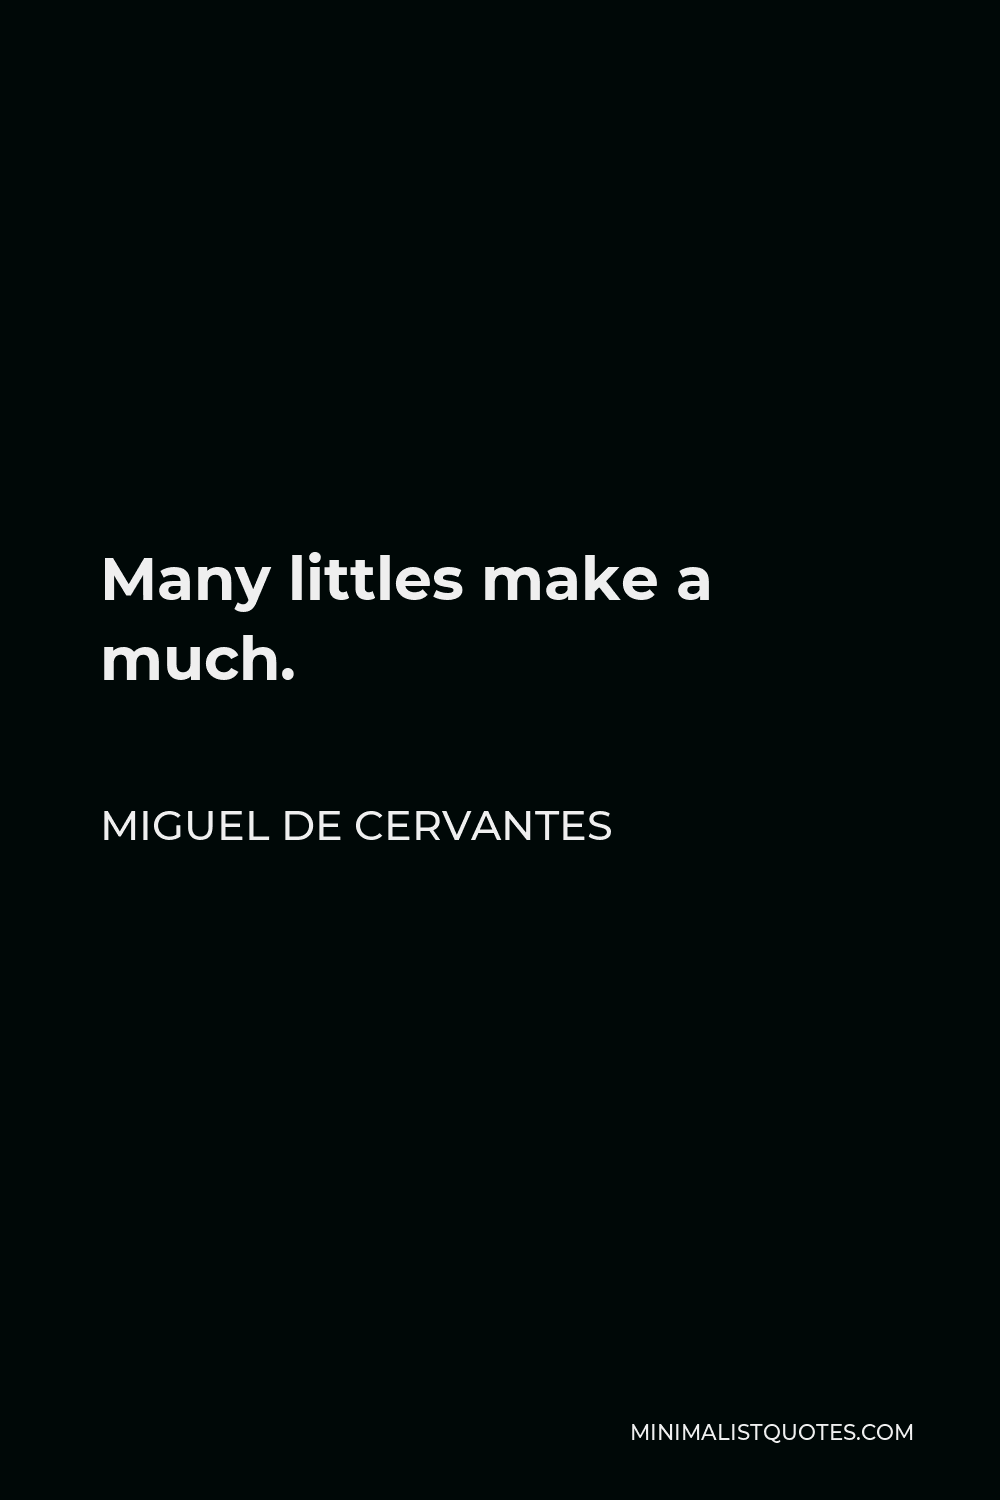 Miguel de Cervantes Quote - Many littles make a much.